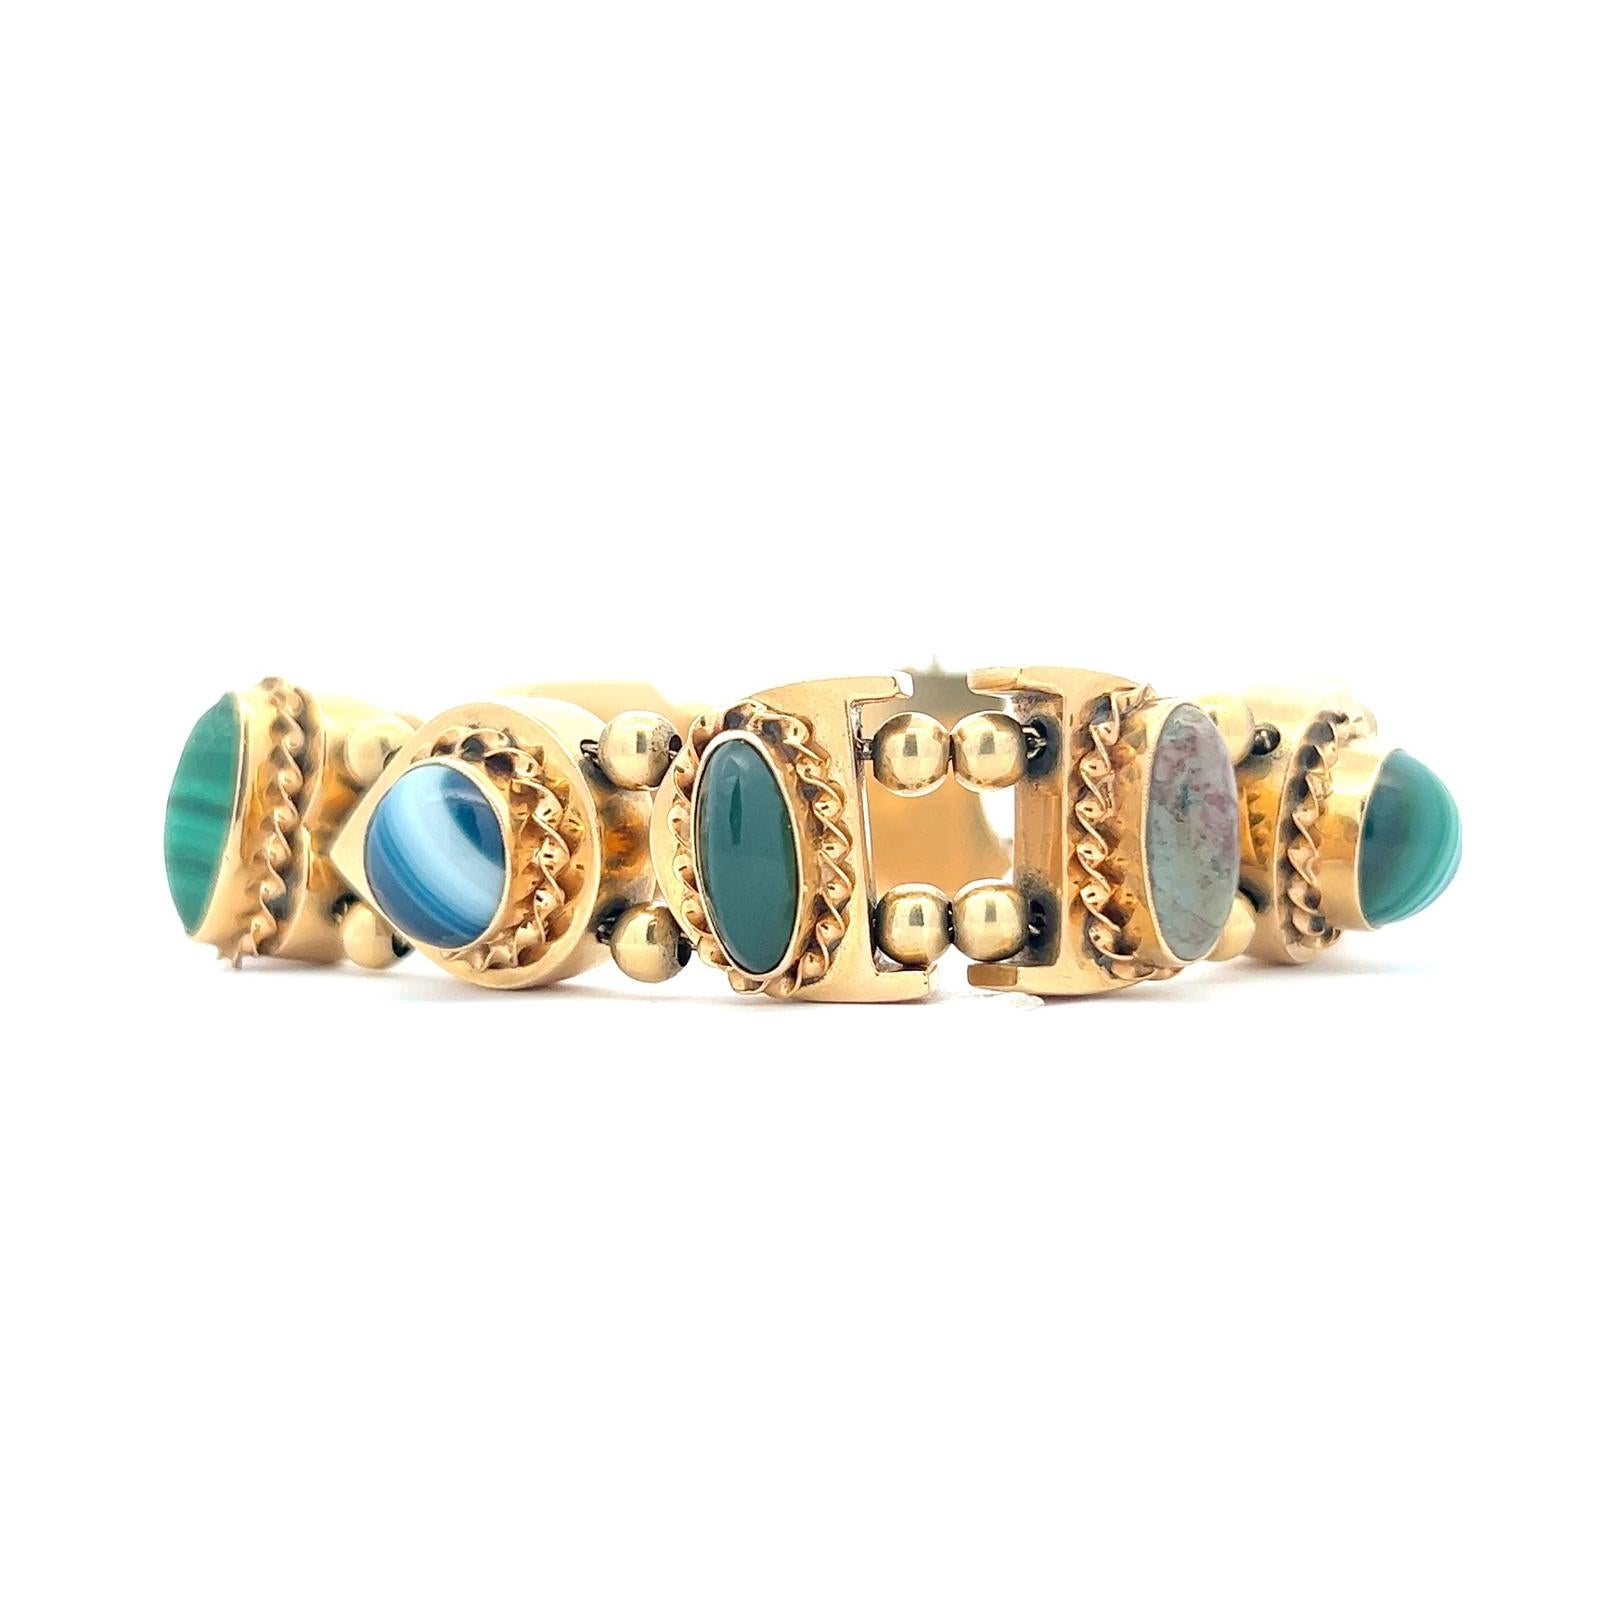 Original vintage slide bracelet crafted in 14 karat yellow gold. The charms feature malachite, amethyst, garnet, and citirine gemstones. The braelet measures 6.5 inches in length, box clasp with safety chain. 